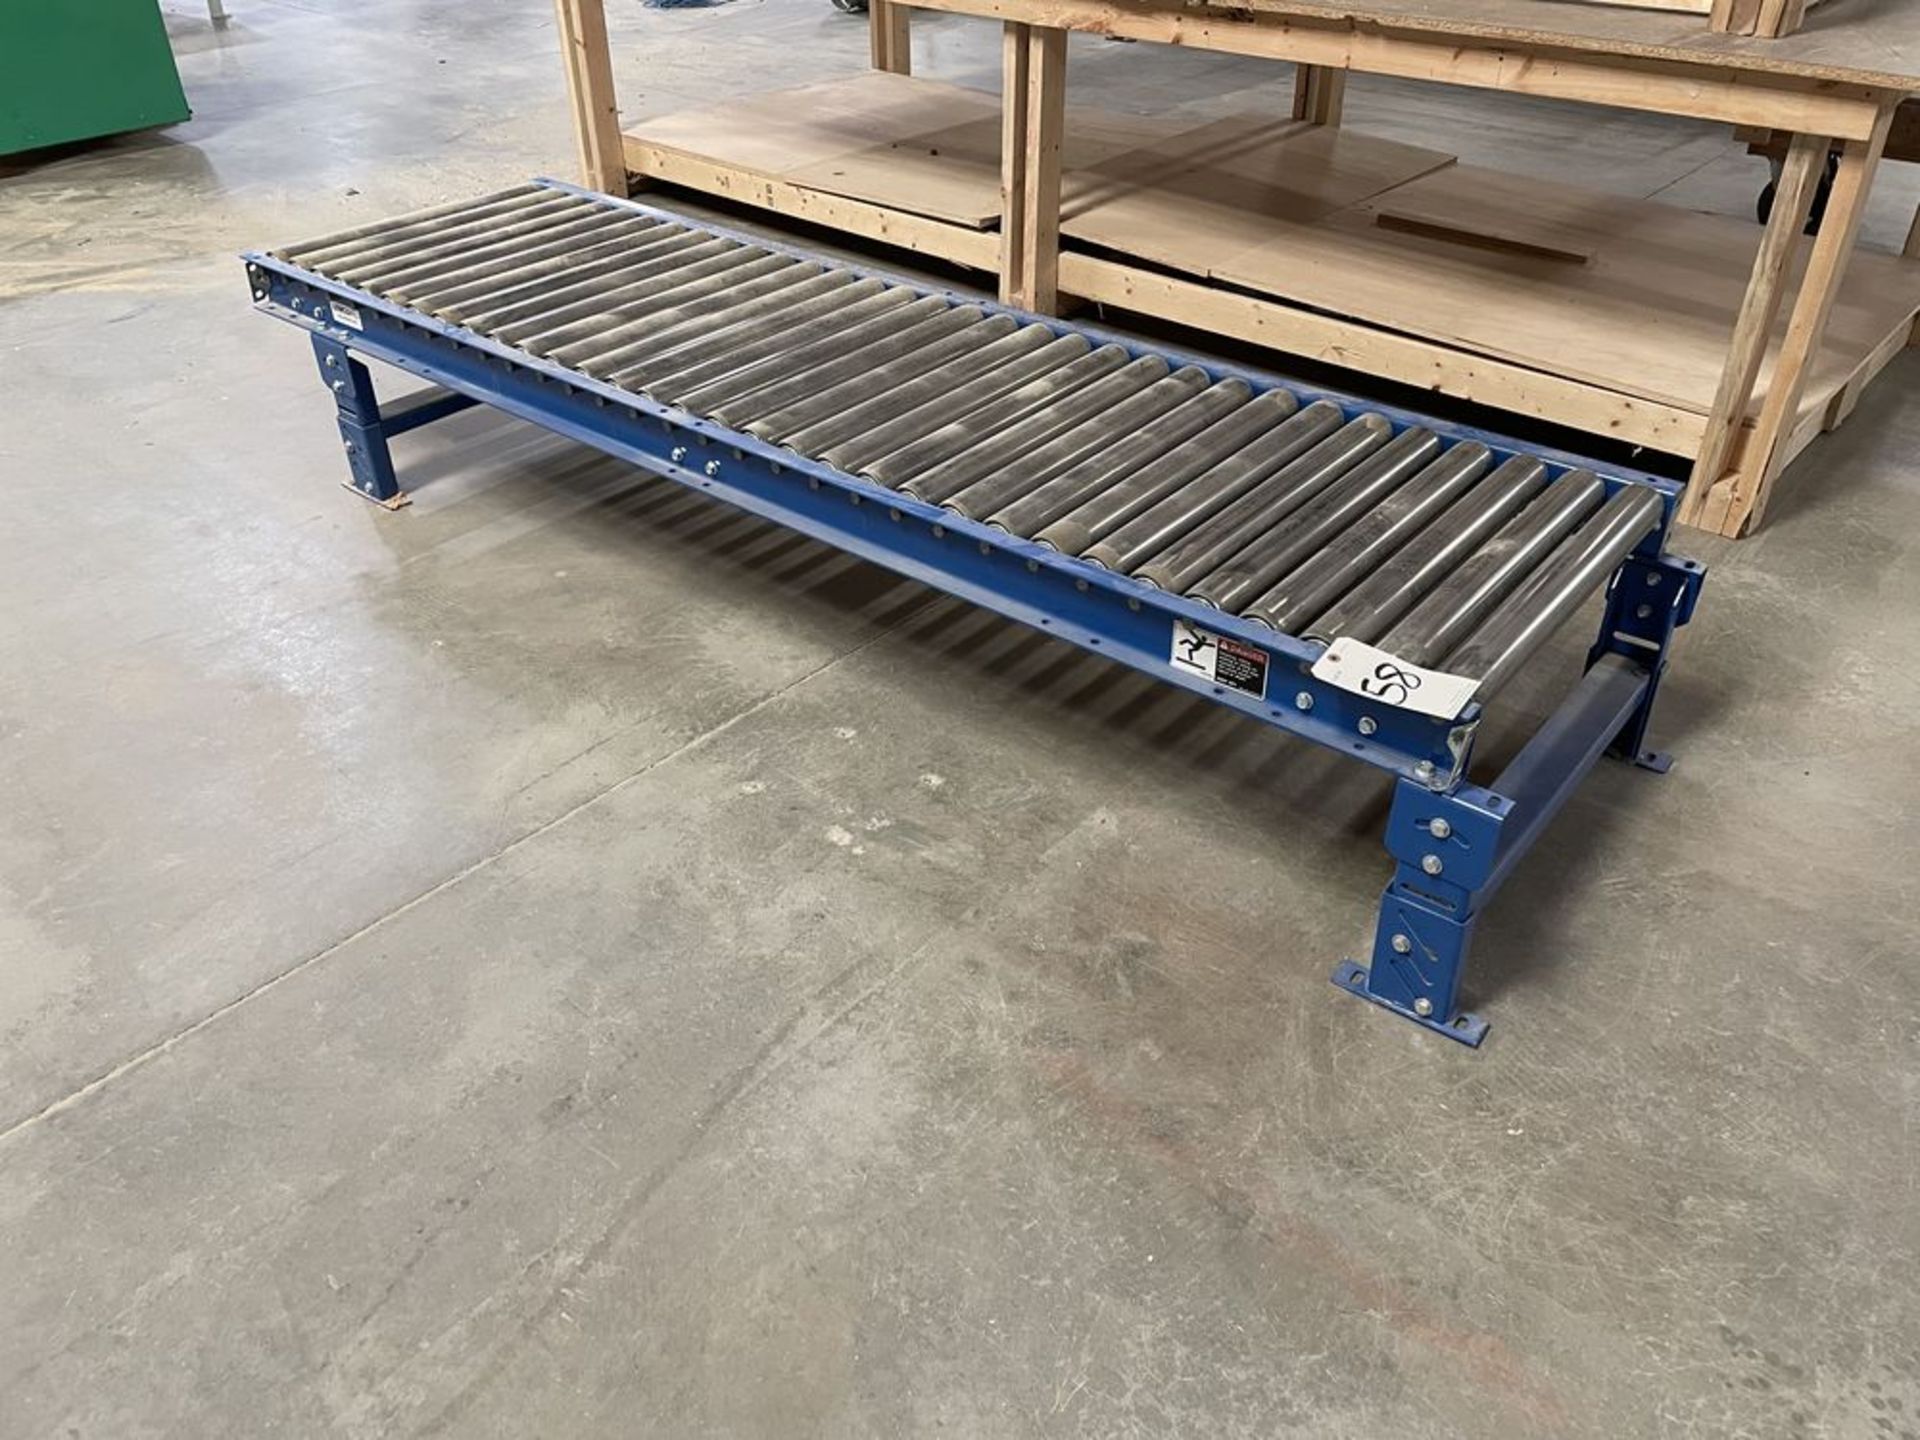 Lewco 8' Adjustable Height Roller Table. Equipped with 24" wide rollers, adjustable height legs to